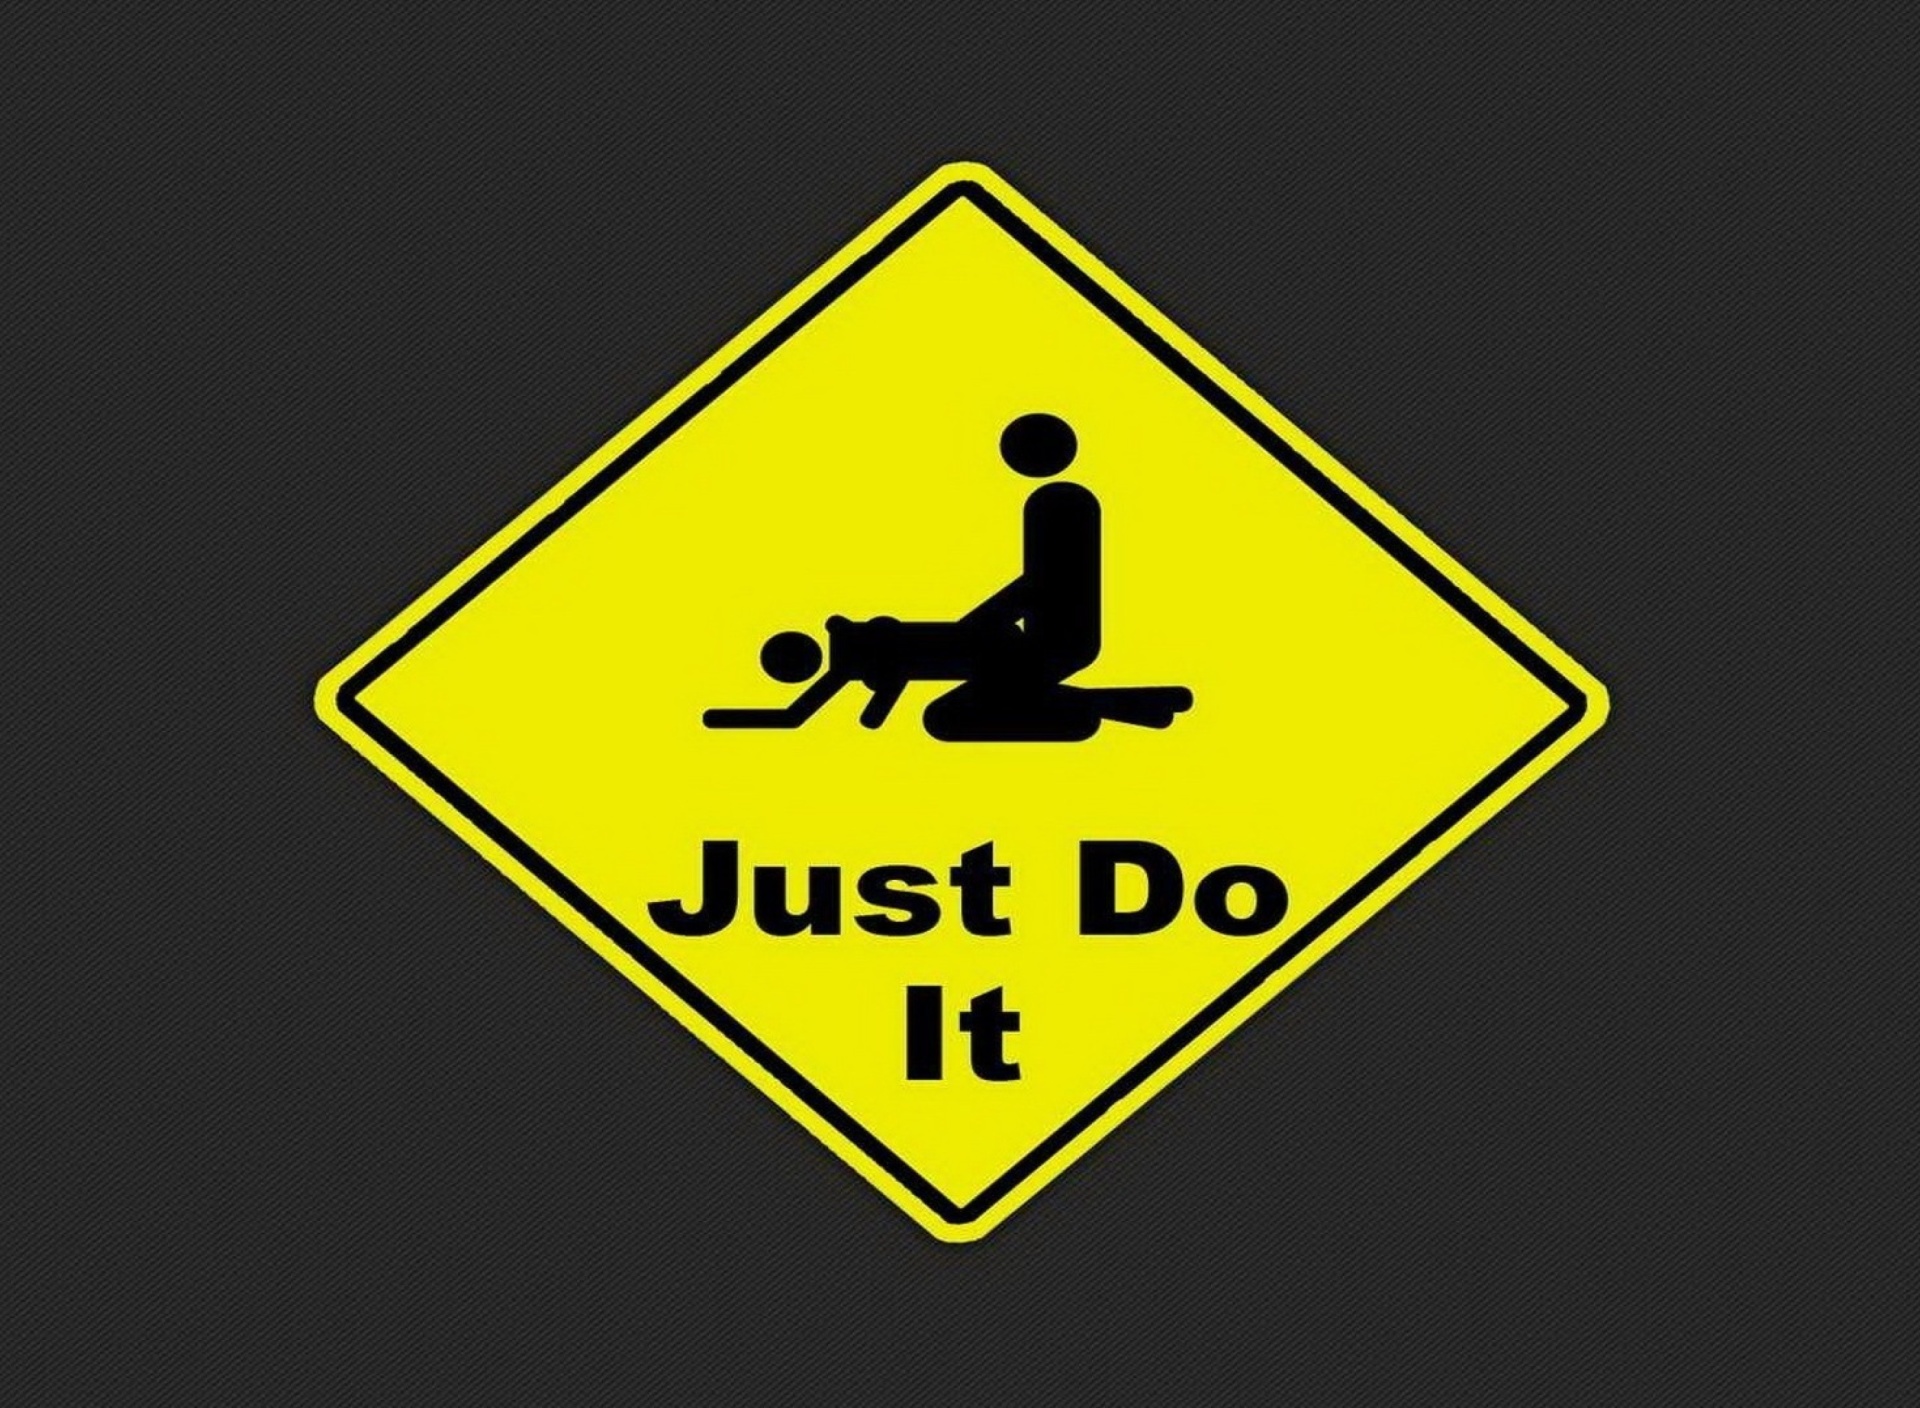 Just Do It Funny Sign wallpaper 1920x1408